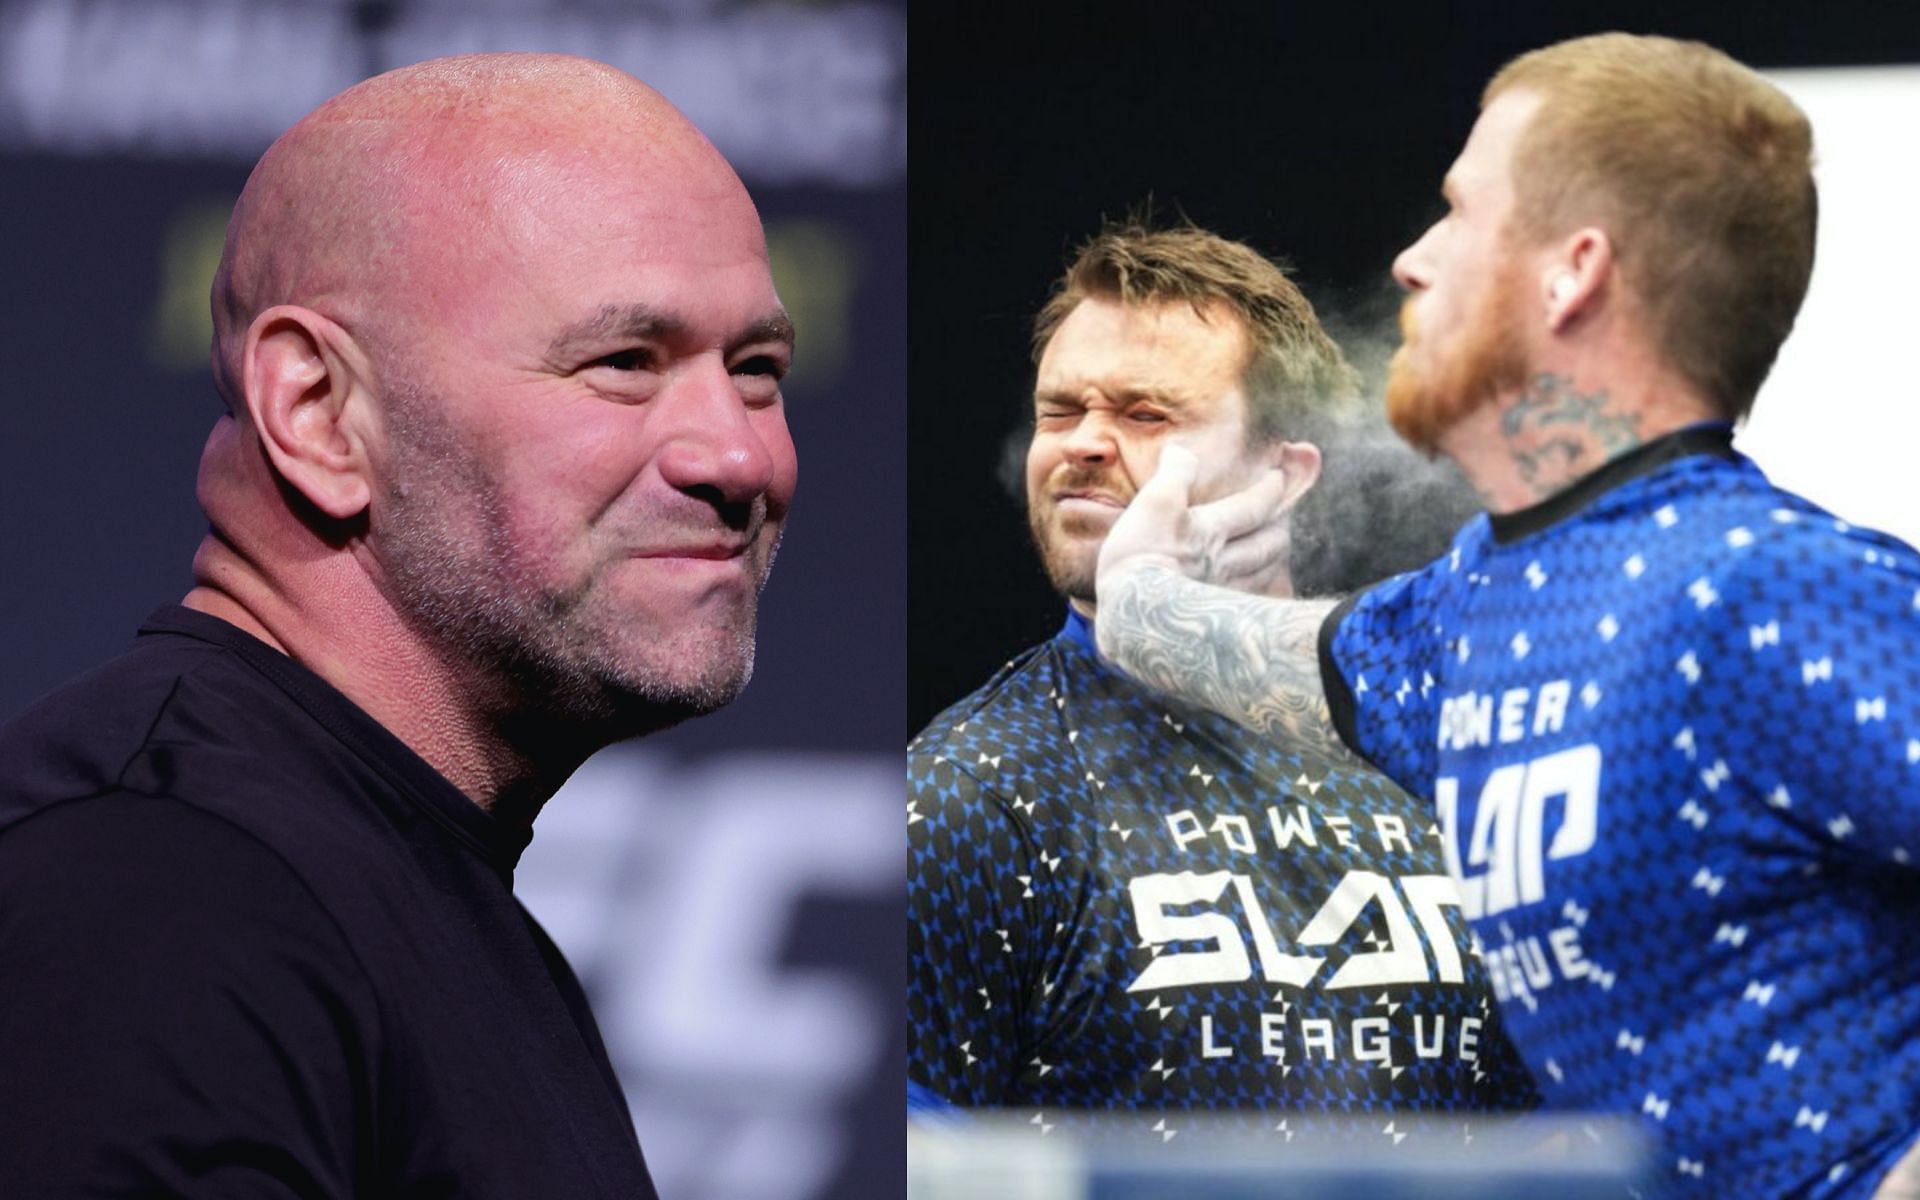 Dana White (left) and Chris Kennedy vs. Chris Thomas at Power Slap Fighting [Image Courtesy: Getty Images and The Mirror ]